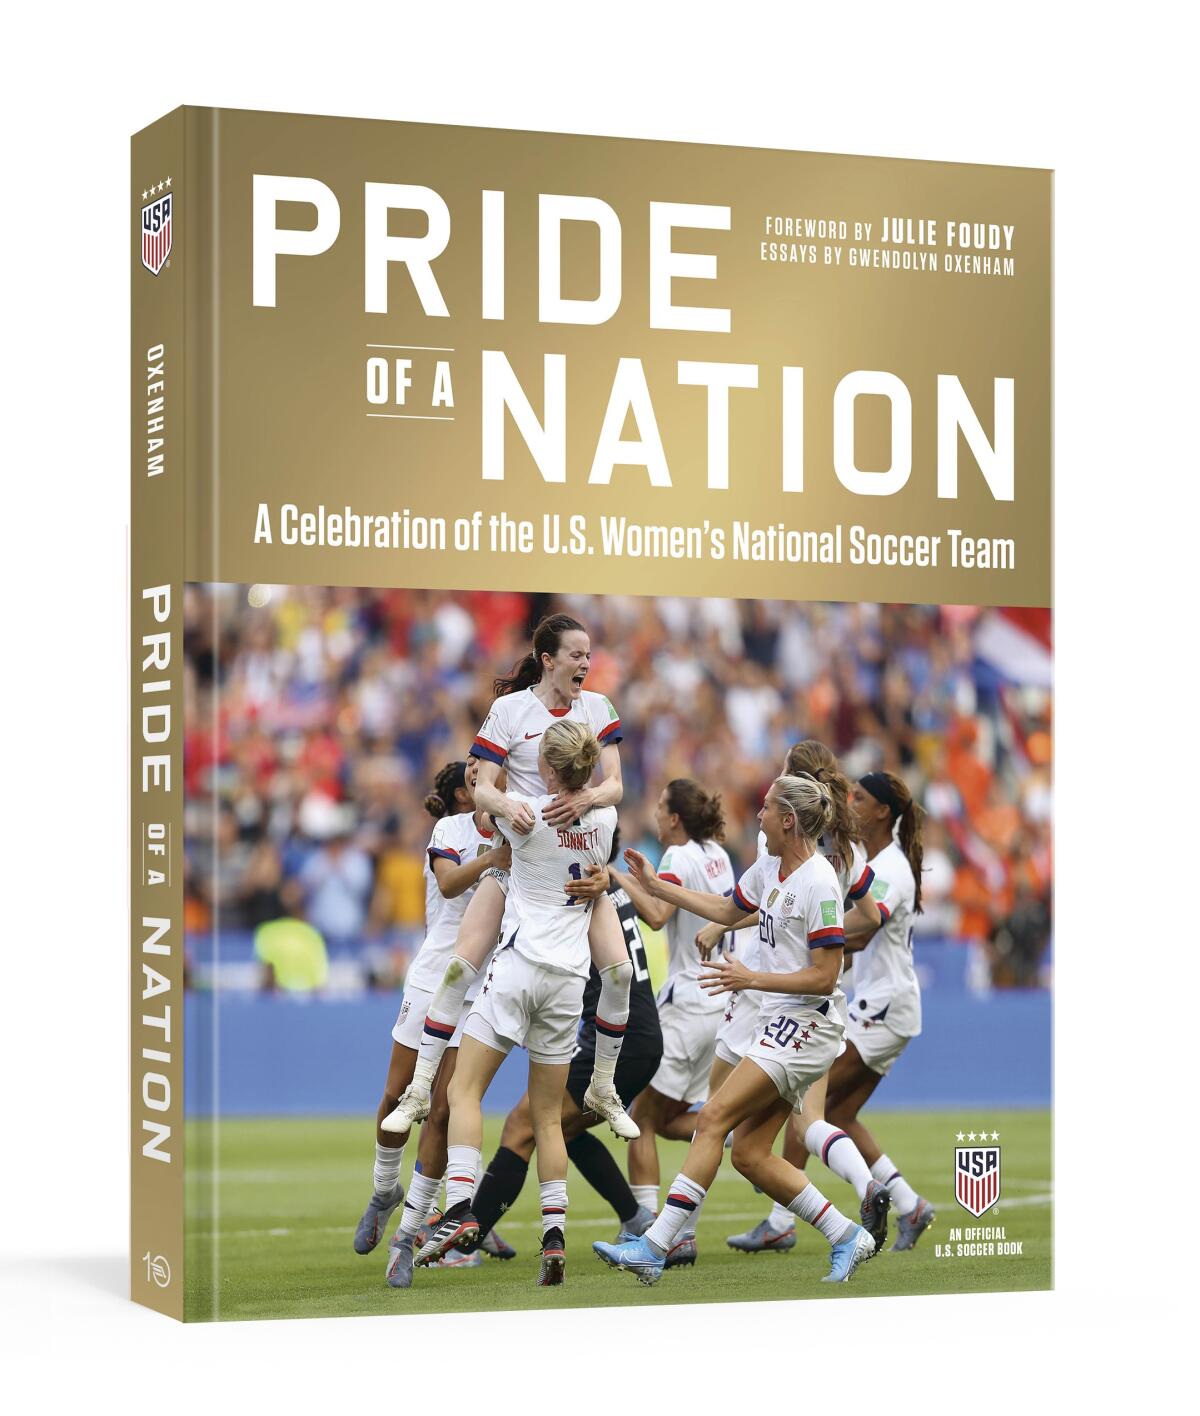 The cover of the book "Pride of a Nation" features a photo of U.S. women's soccer team players celebrating.